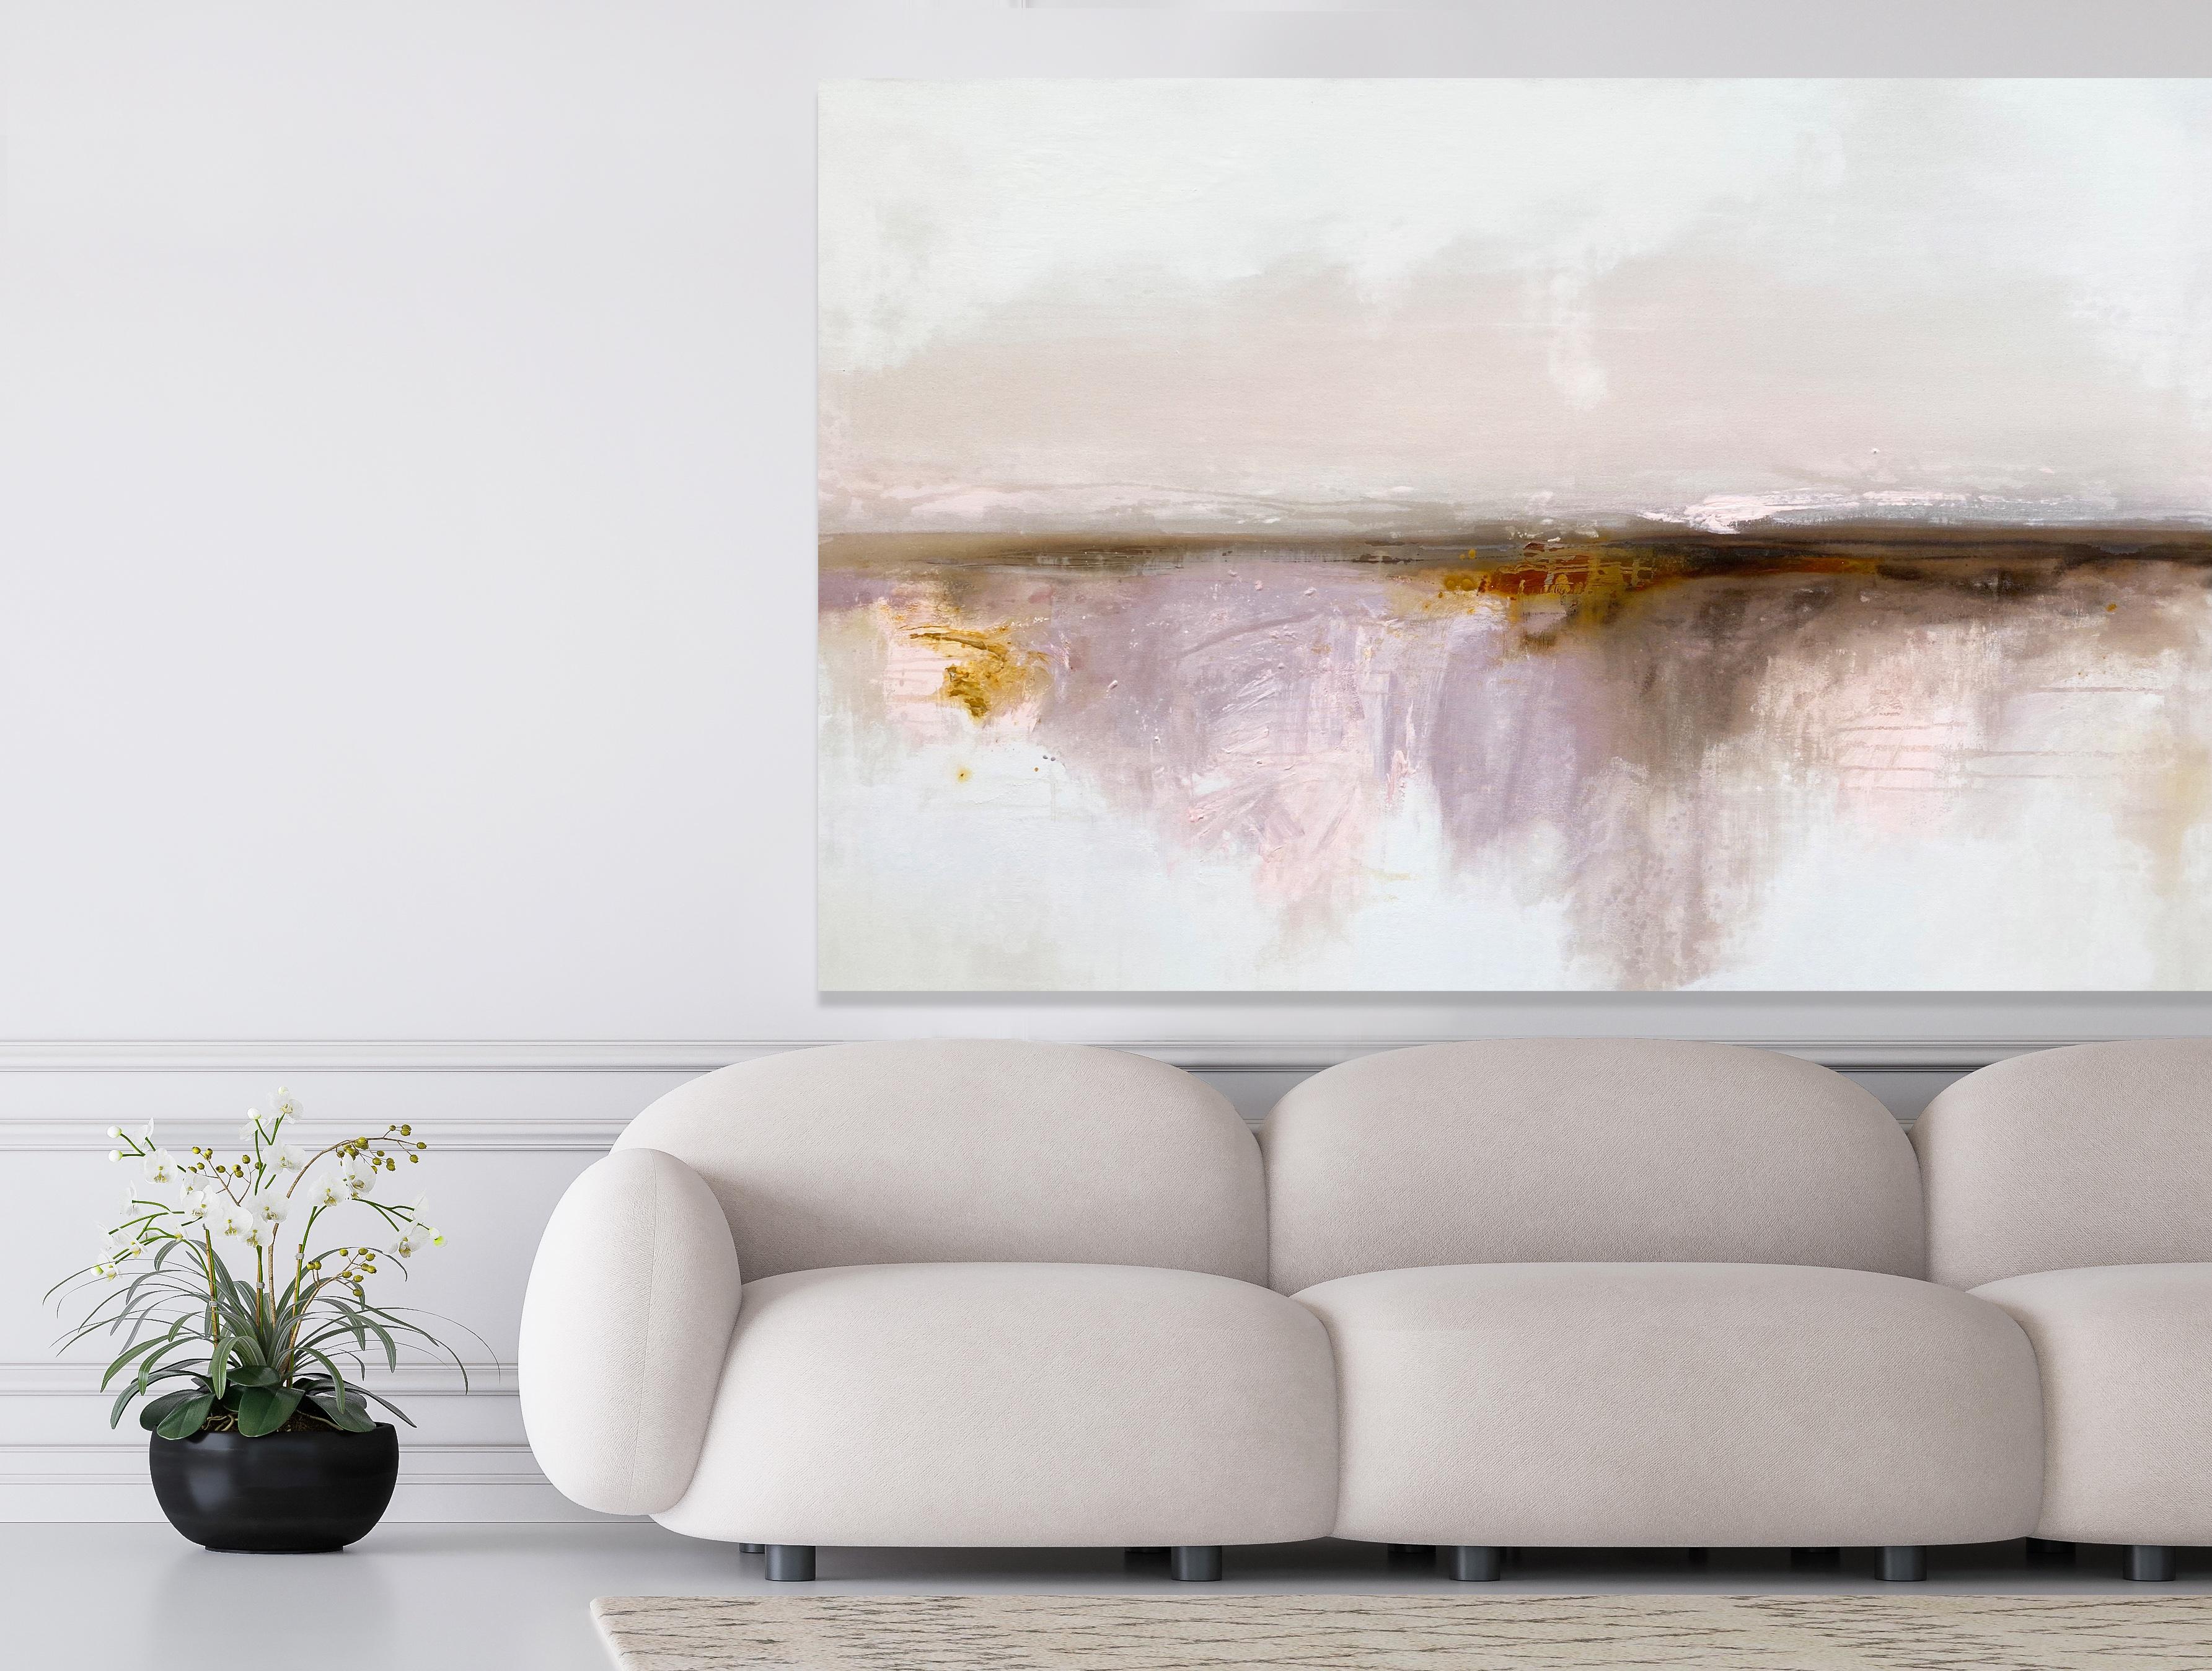 Pink Tan earthy large abstract impressionist landscape original painting - Painting by Kathleen Rhee